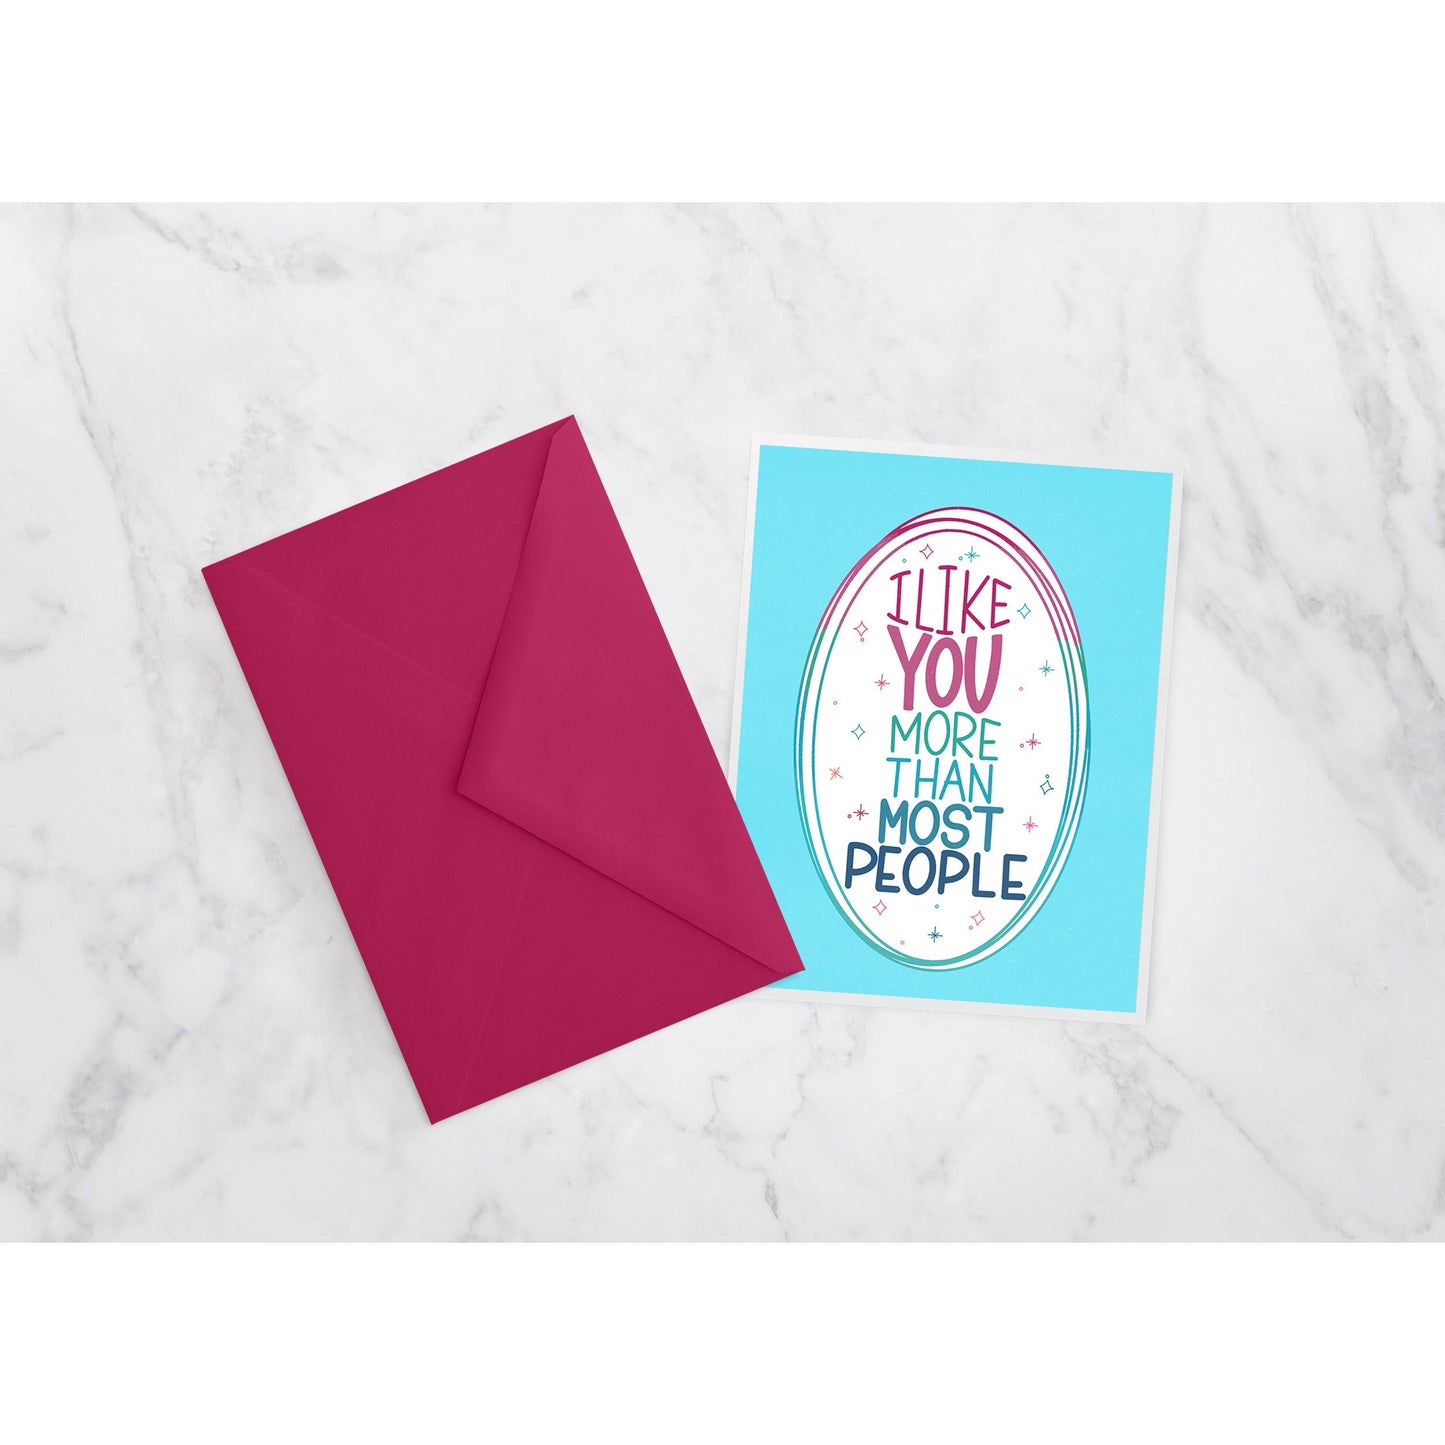 I Like You More Than Most People - Greeting Card | Friend, Everyday, Co-Worker, funny card